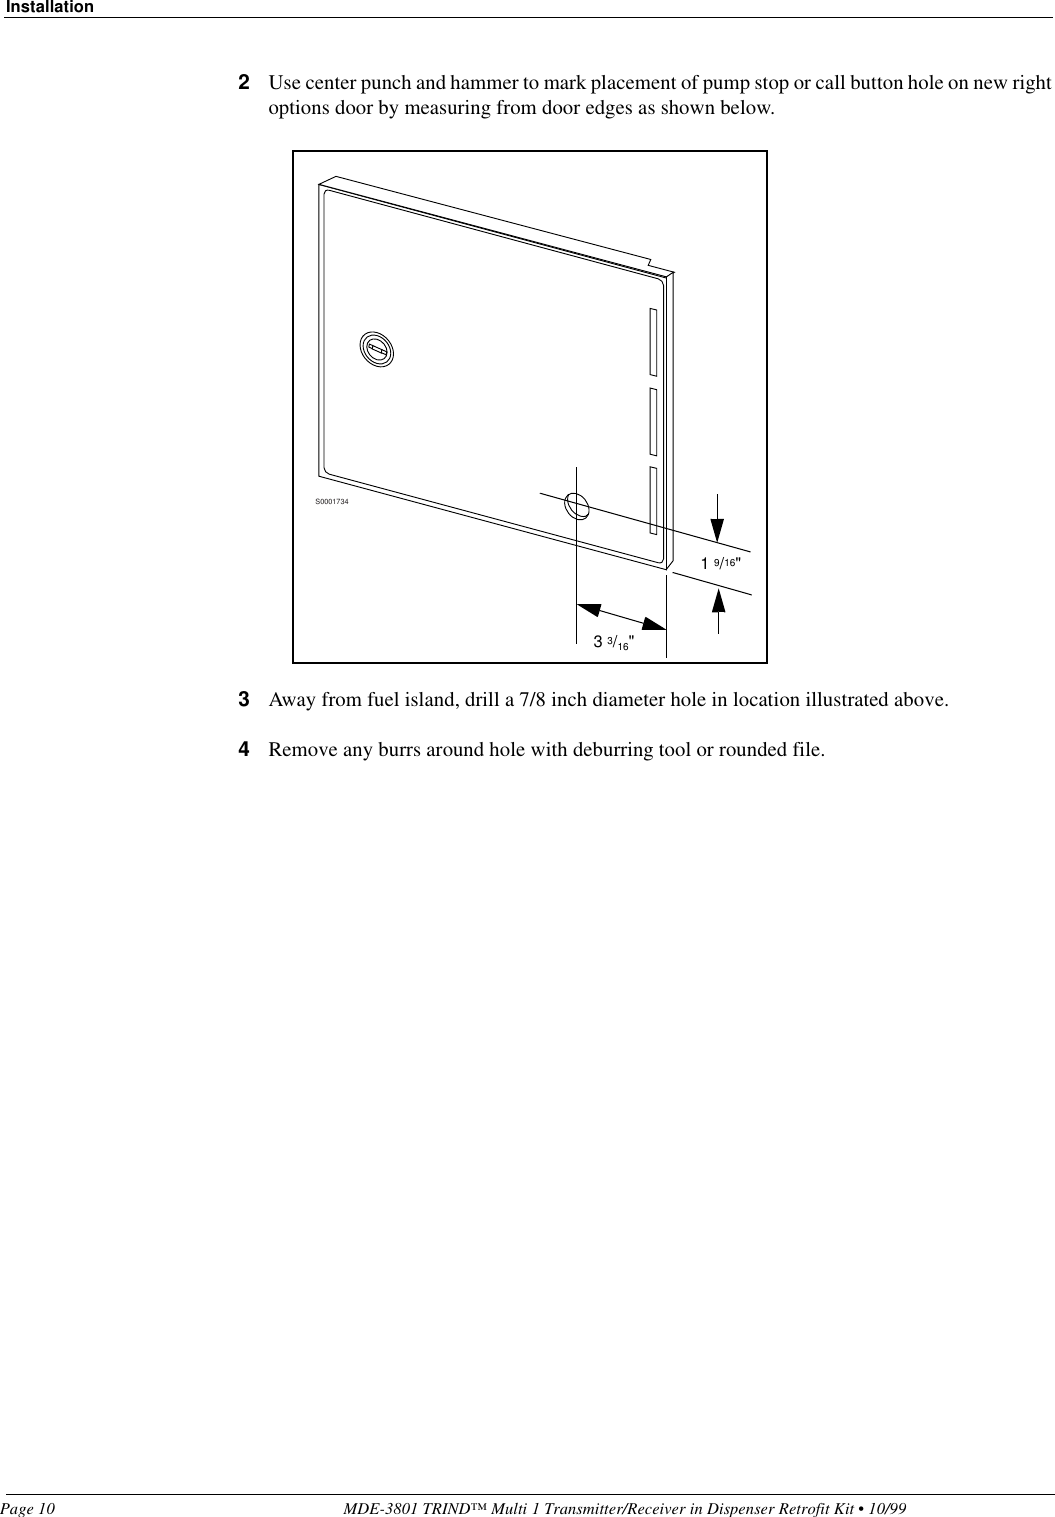 InstallationPage 10 MDE-3801 TRIND™ Multi 1 Transmitter/Receiver in Dispenser Retrofit Kit • 10/992Use center punch and hammer to mark placement of pump stop or call button hole on new right options door by measuring from door edges as shown below. 3Away from fuel island, drill a 7/8 inch diameter hole in location illustrated above. 4Remove any burrs around hole with deburring tool or rounded file.S00017341 9/16&quot;3 3/16&quot;